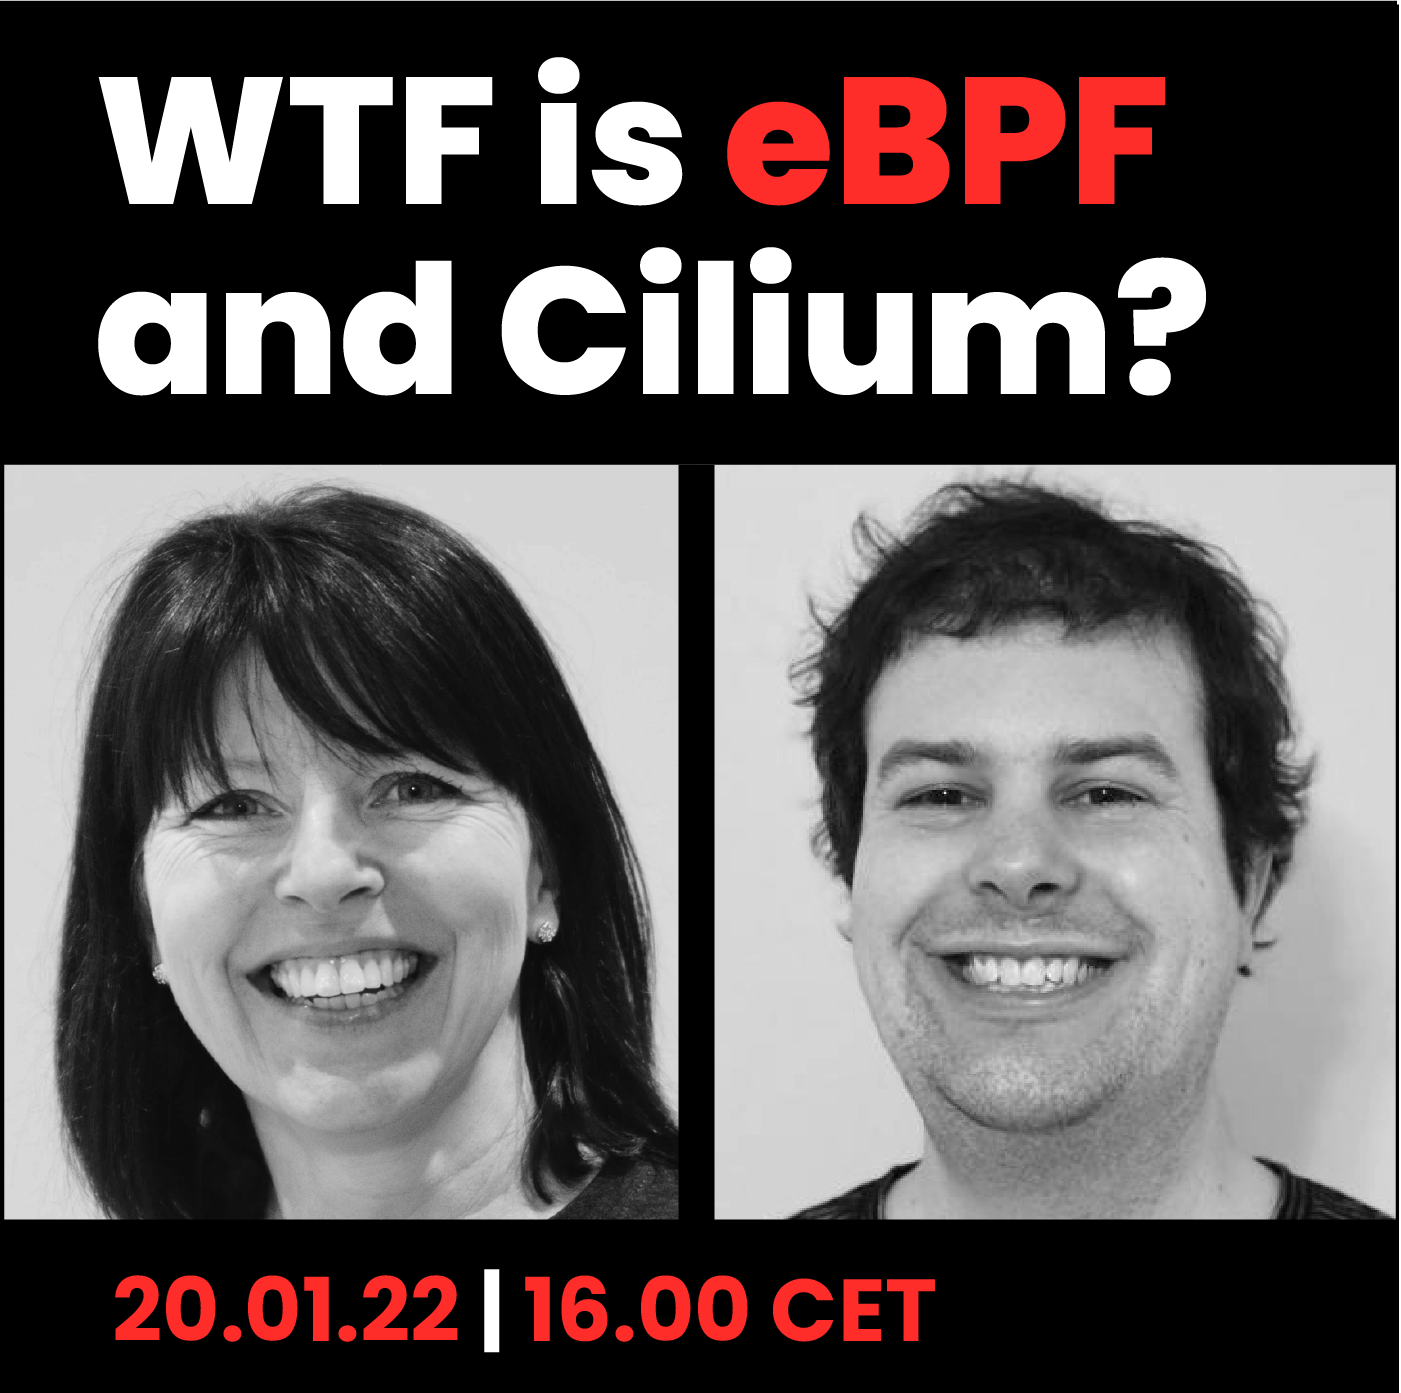 WTF is ebpf and cilium?